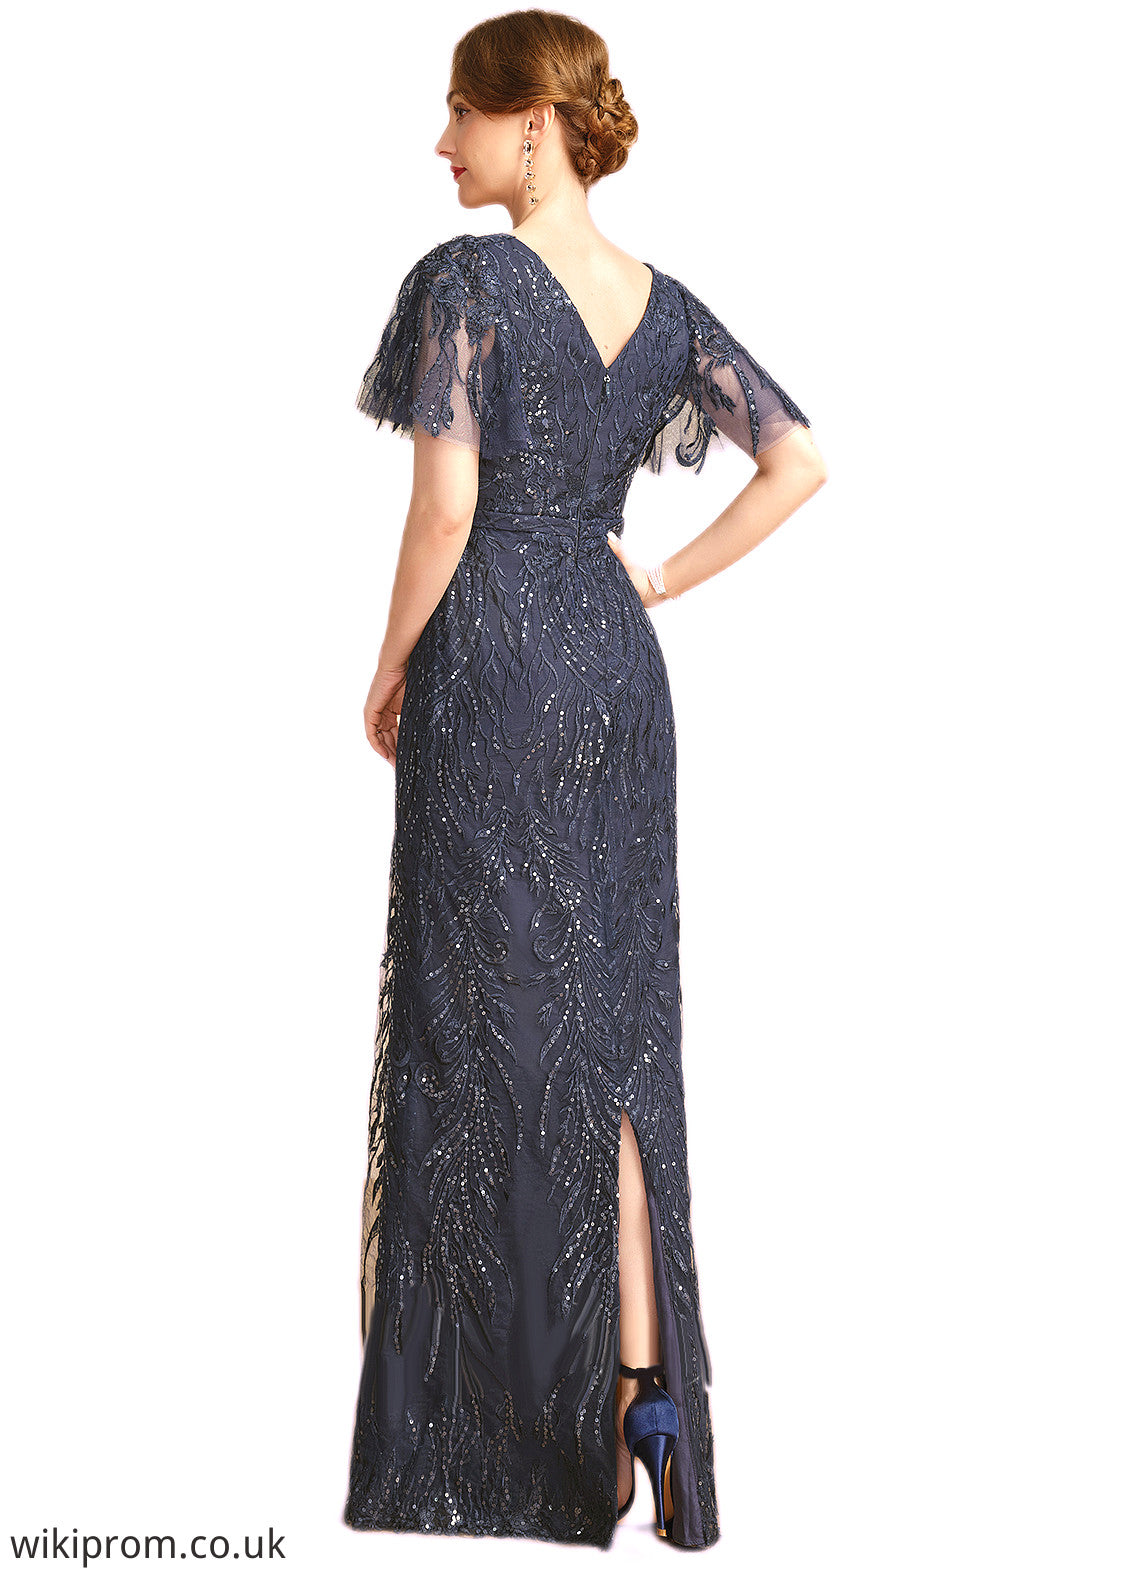 Claire Sheath/Column Square Floor-Length Lace Mother of the Bride Dress With Sequins SWK126P0021665